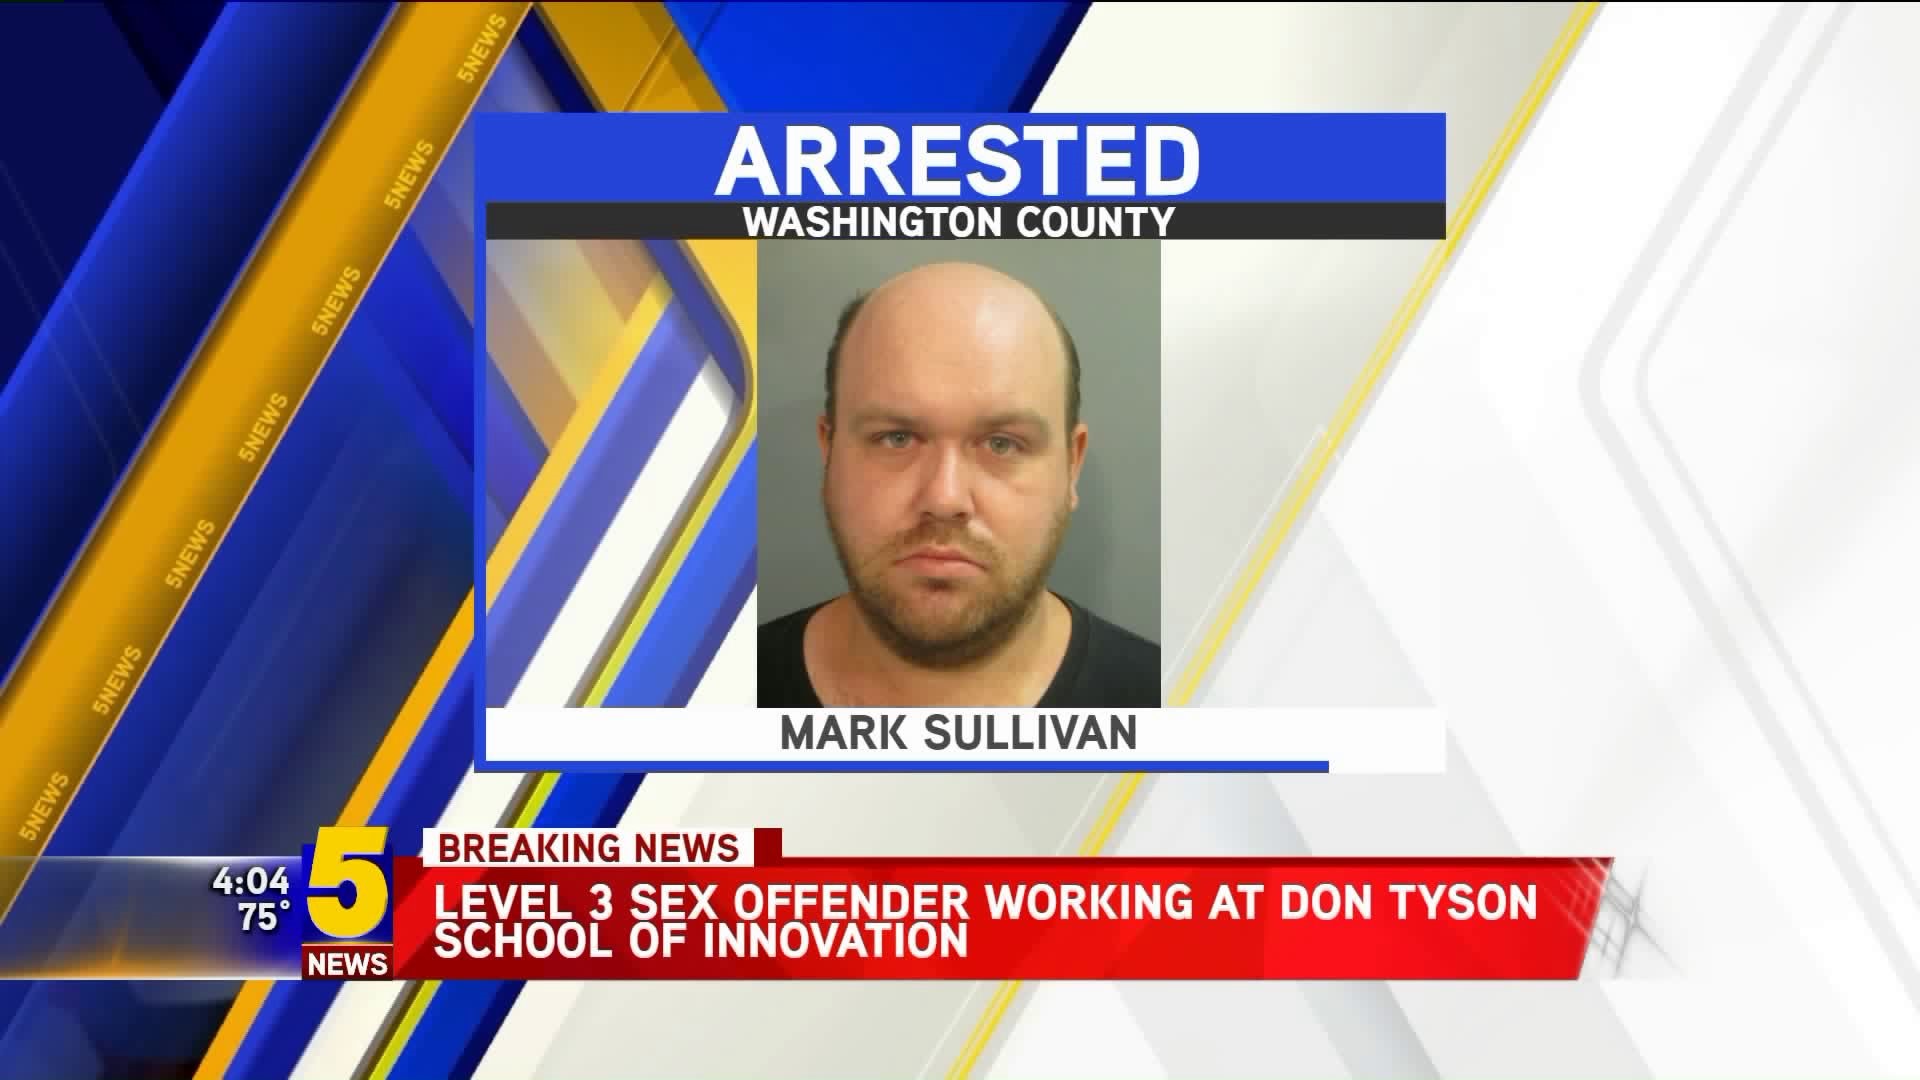 Level 3 Sex Offender Worked at Don Tyson School of Innovation